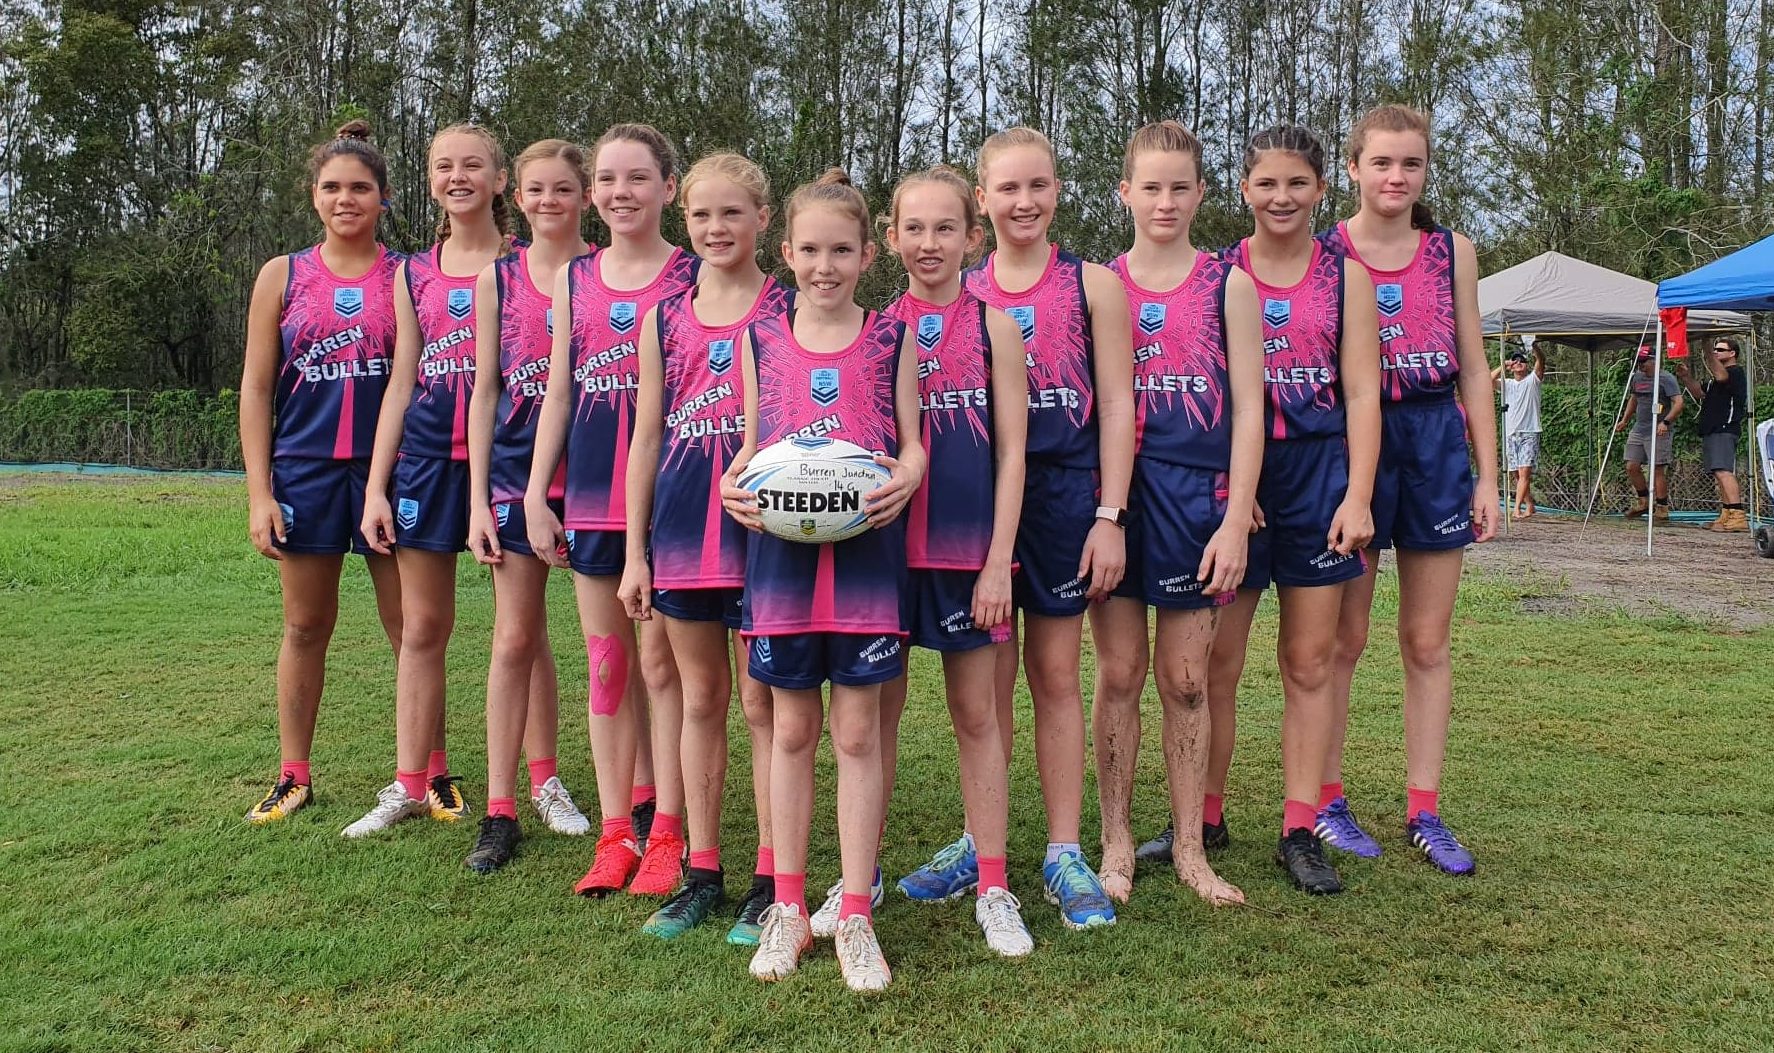 Burren Bullets have a blast at the NSW Junior State Cup